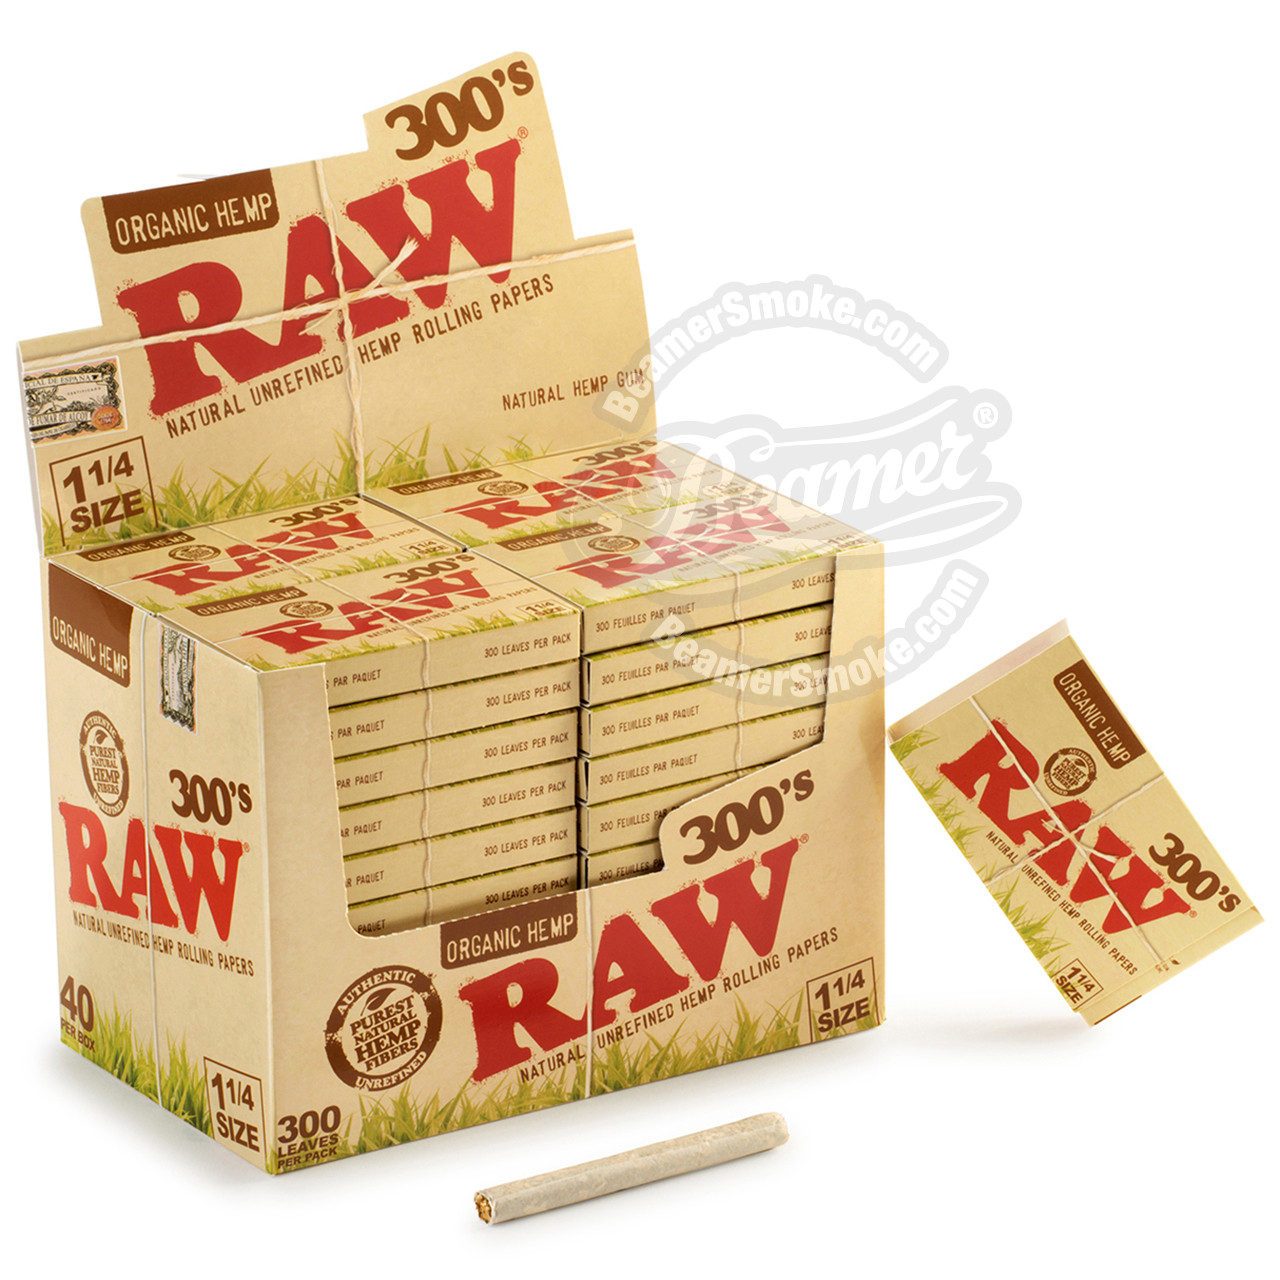 FULL BOX 40 PACKS 300 Leaves Per Pack AUTHENTIC RAW ROLLING PAPER 300'S 1 1/4 